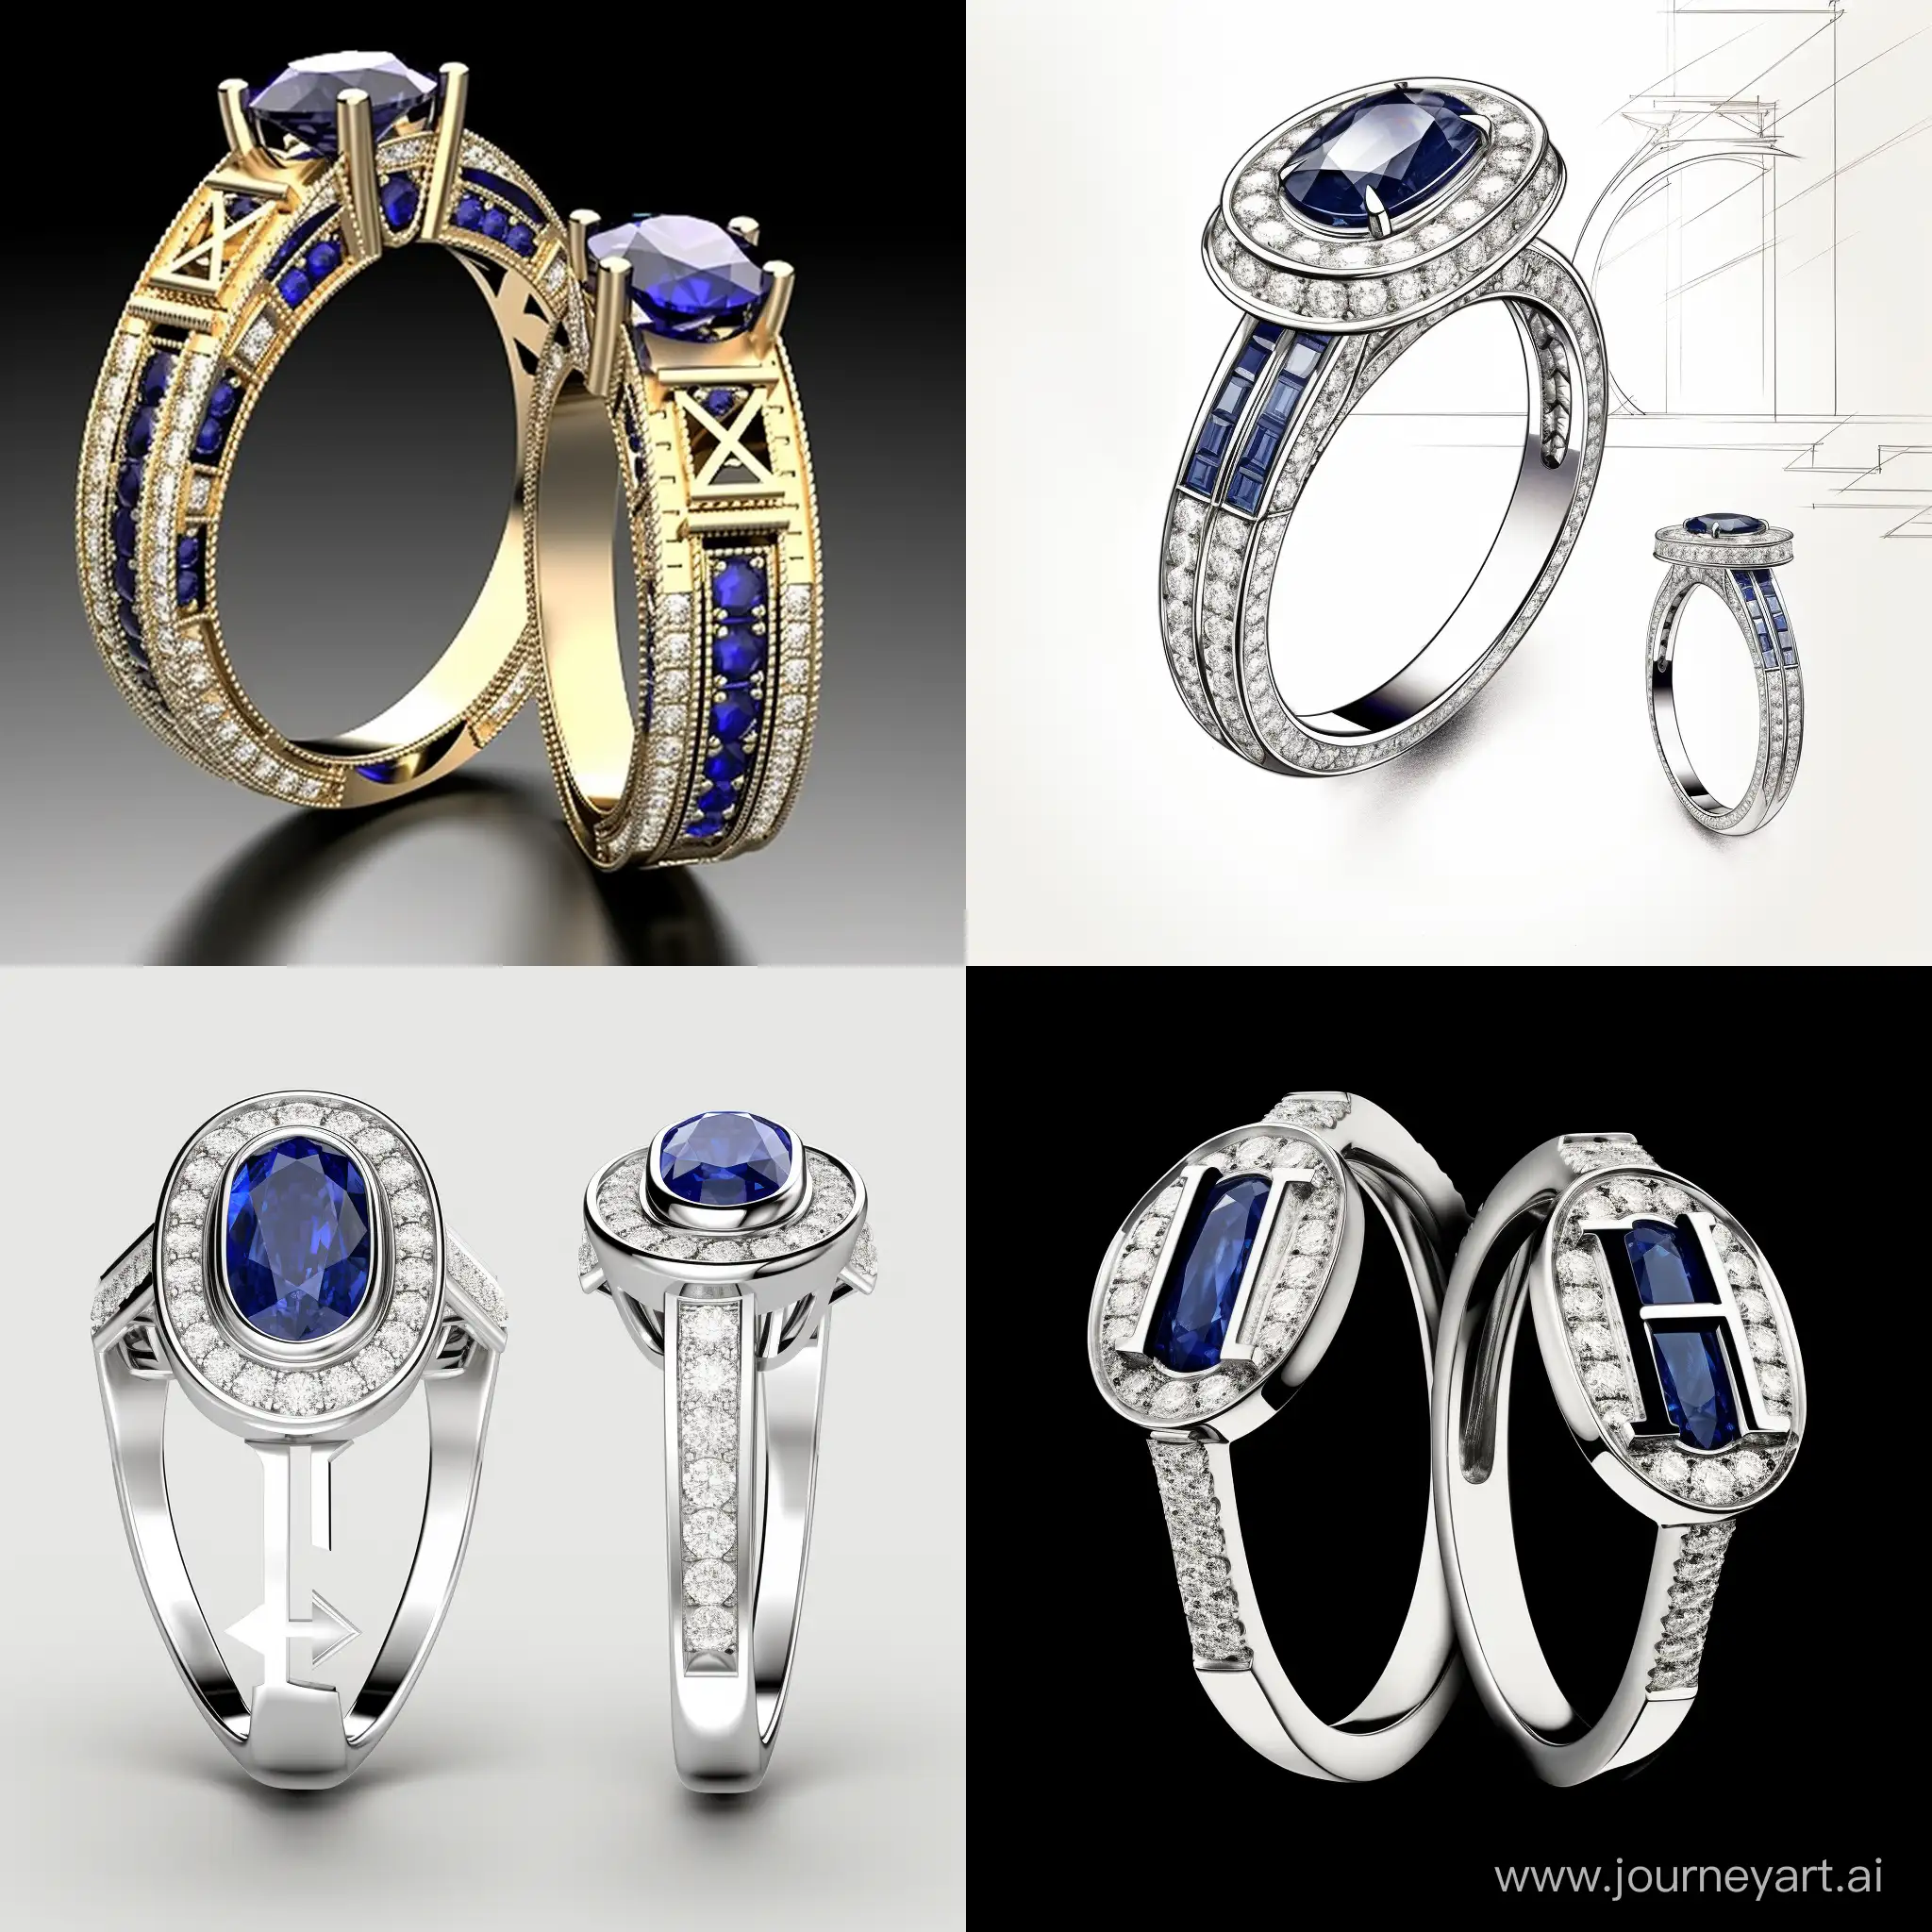 Design an oval one carat royal sapphire ring with a capital letter H on the left ring arm and a capital letter H on the right ring arm